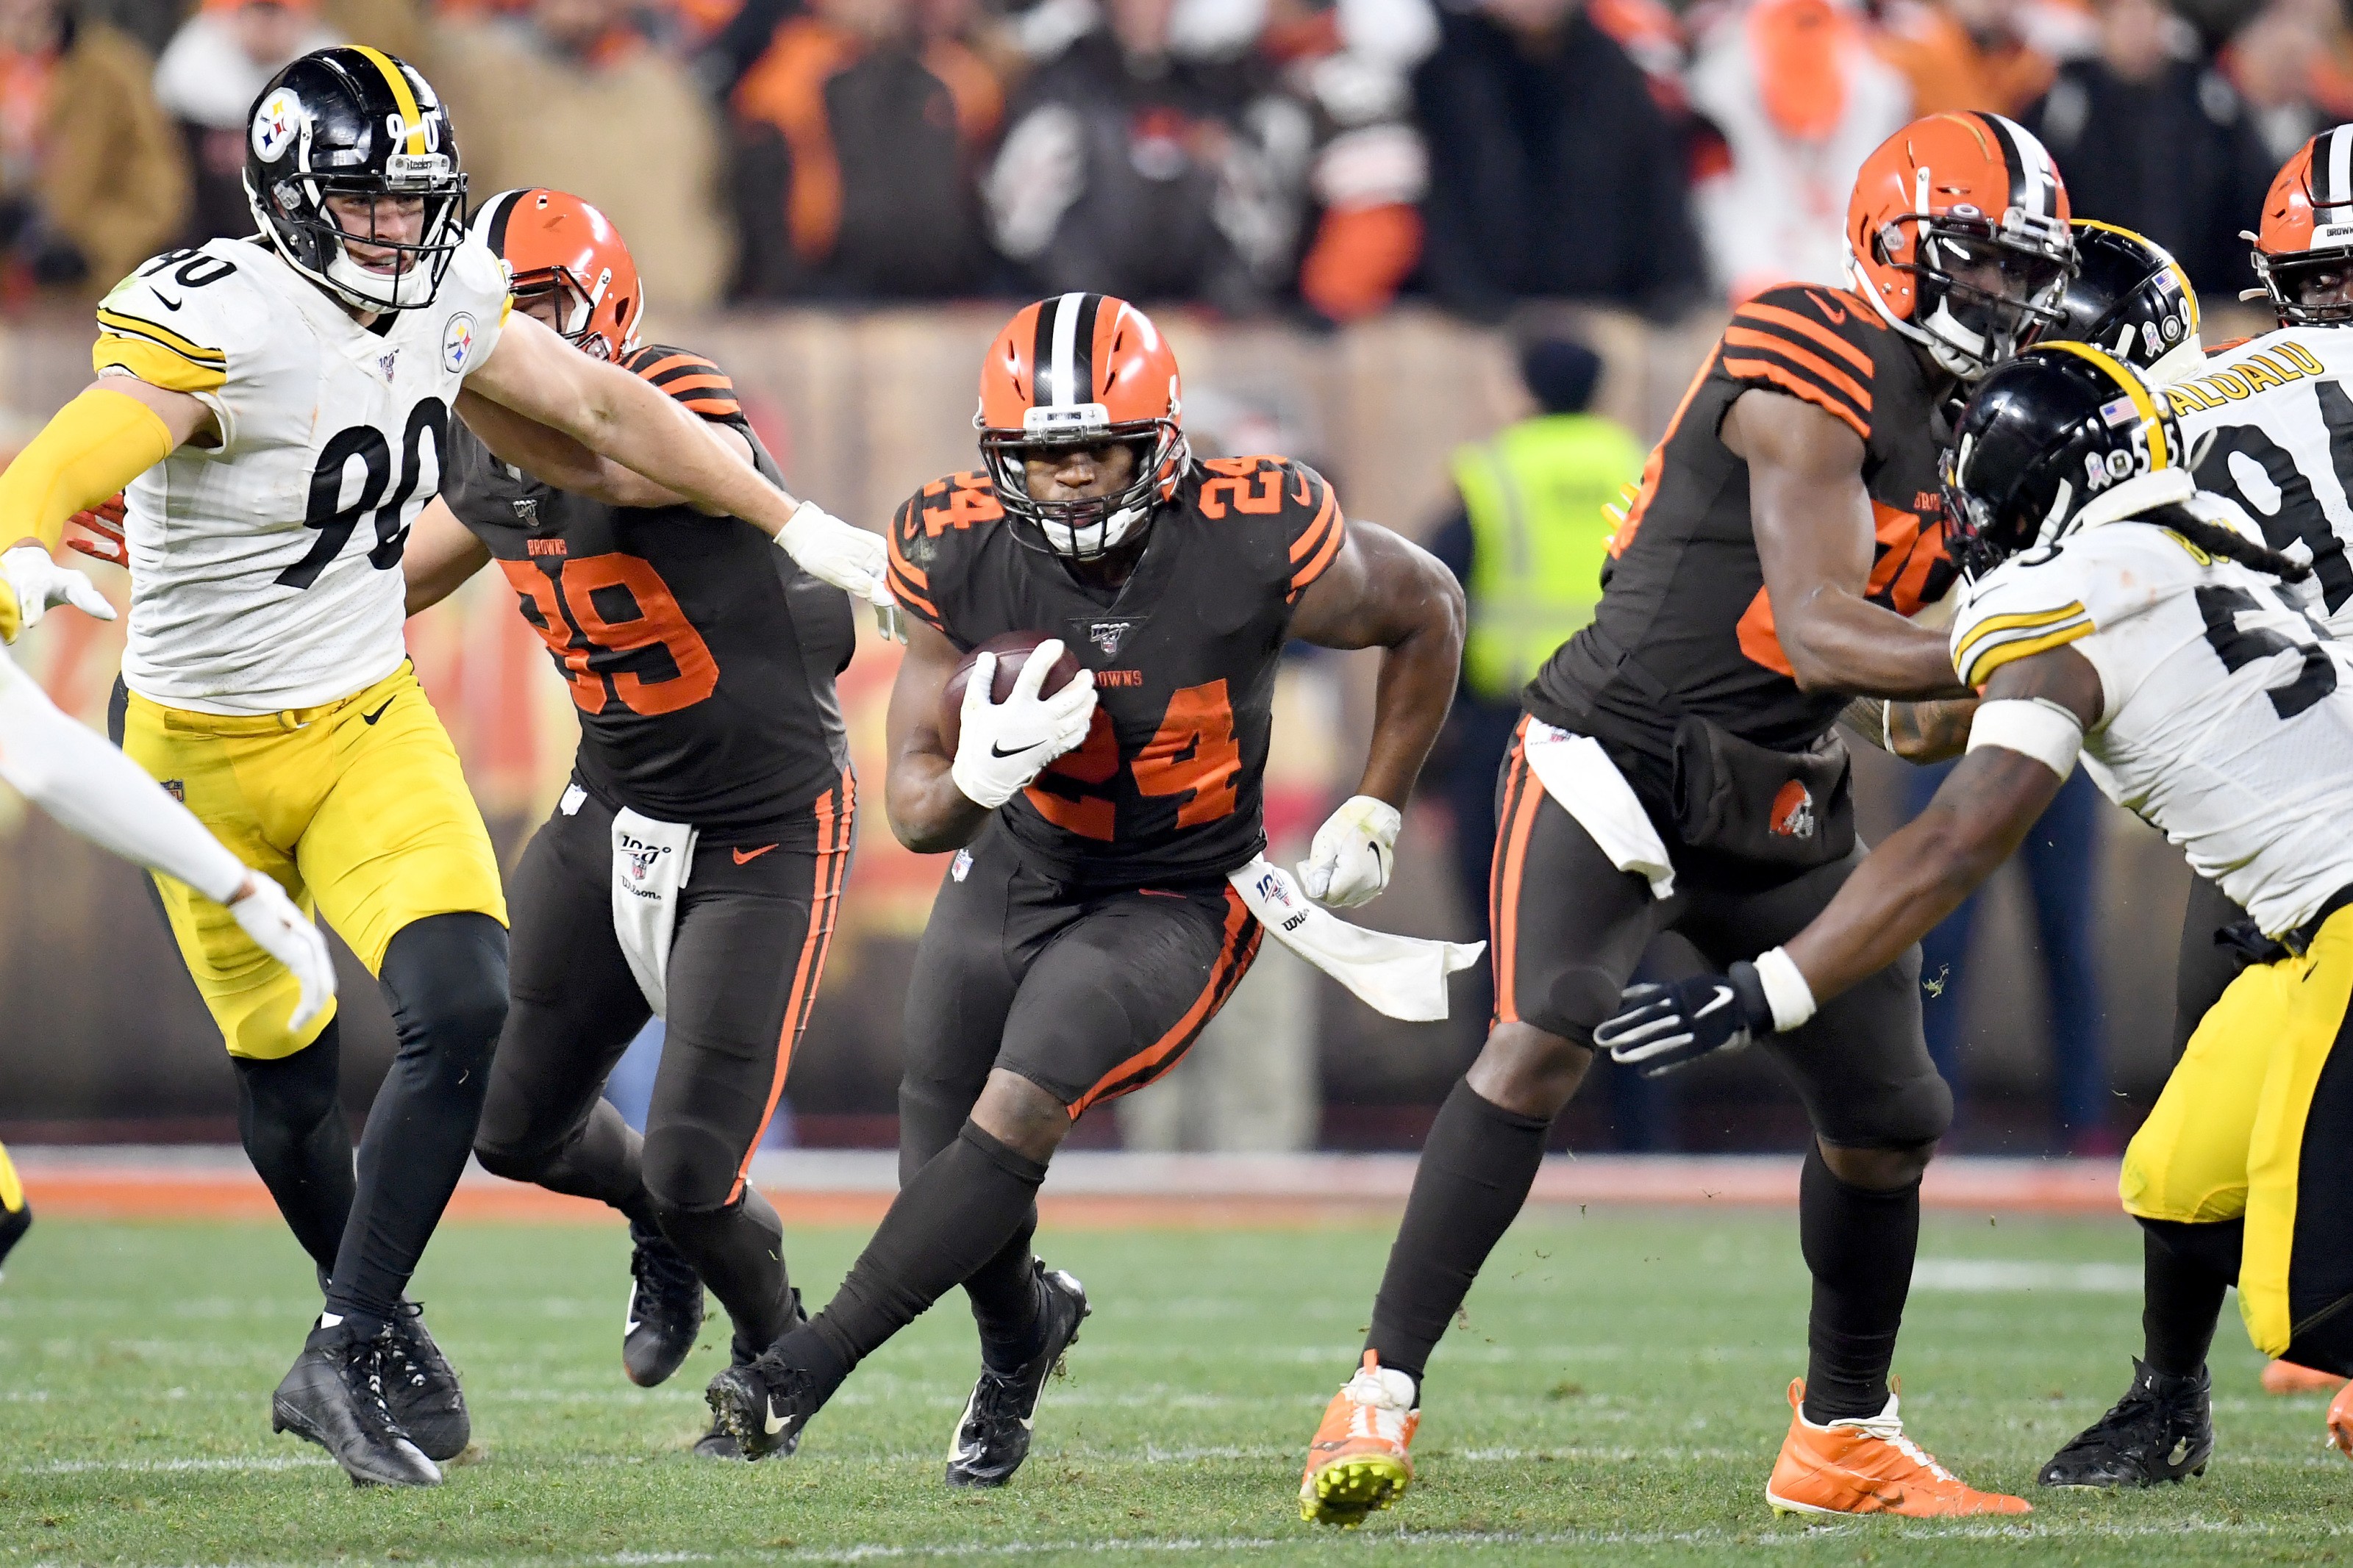 Cleveland Browns, Steelers fined over 2 million total for brawl